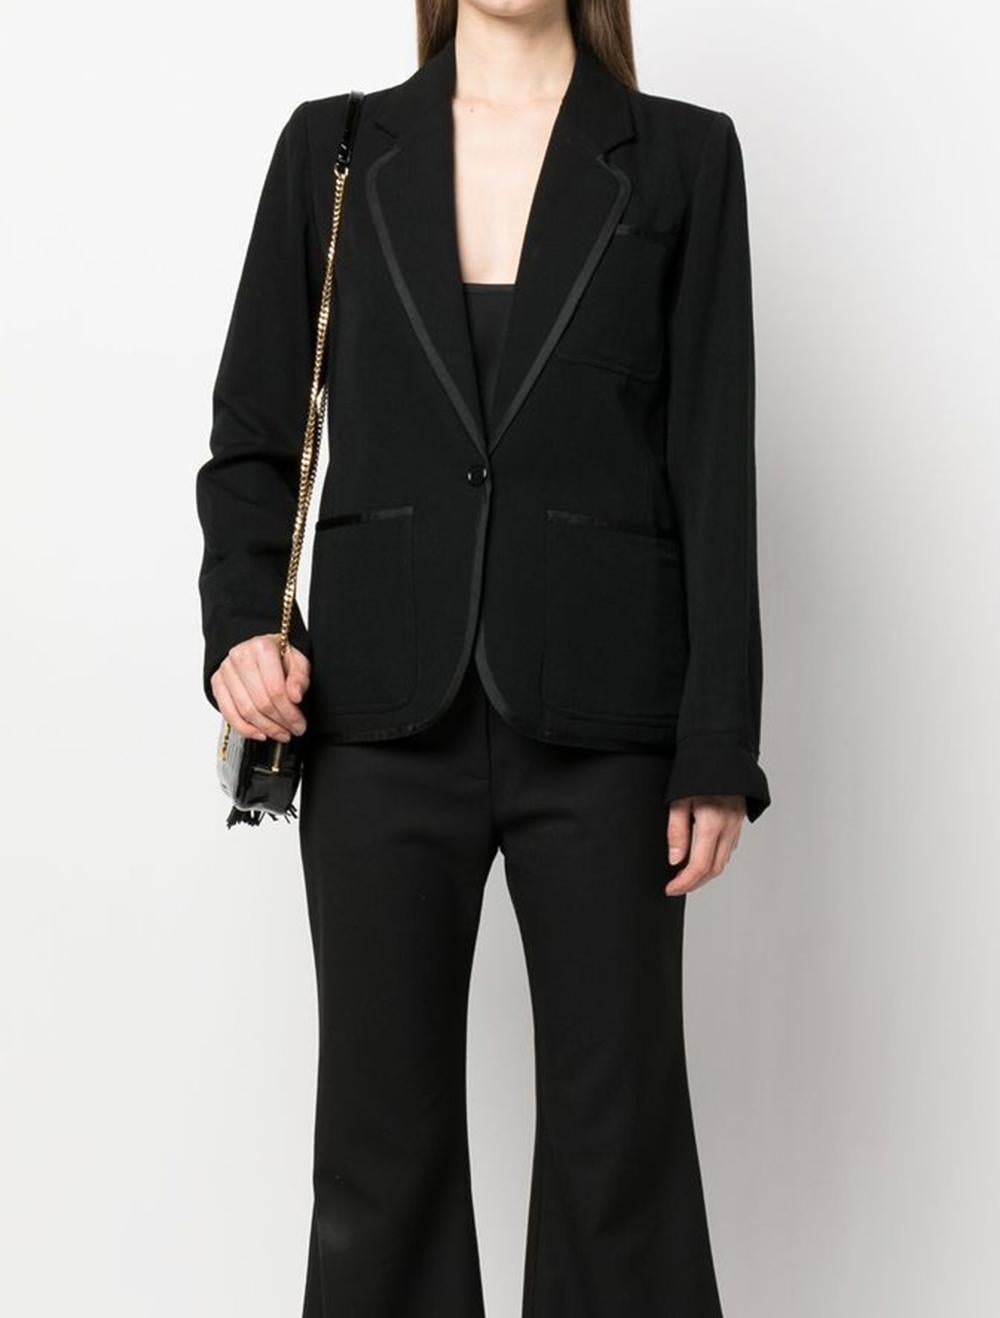 YSL Yves Saint Laurent black wool smoking blazer featuring contrasting trim, notched lapels, front button fastening, chest patch pocket, two front patch pockets, long sleeves, split cuffs, straight hem. 
Composition: 1Wool 100%
Circa 1970s
Label